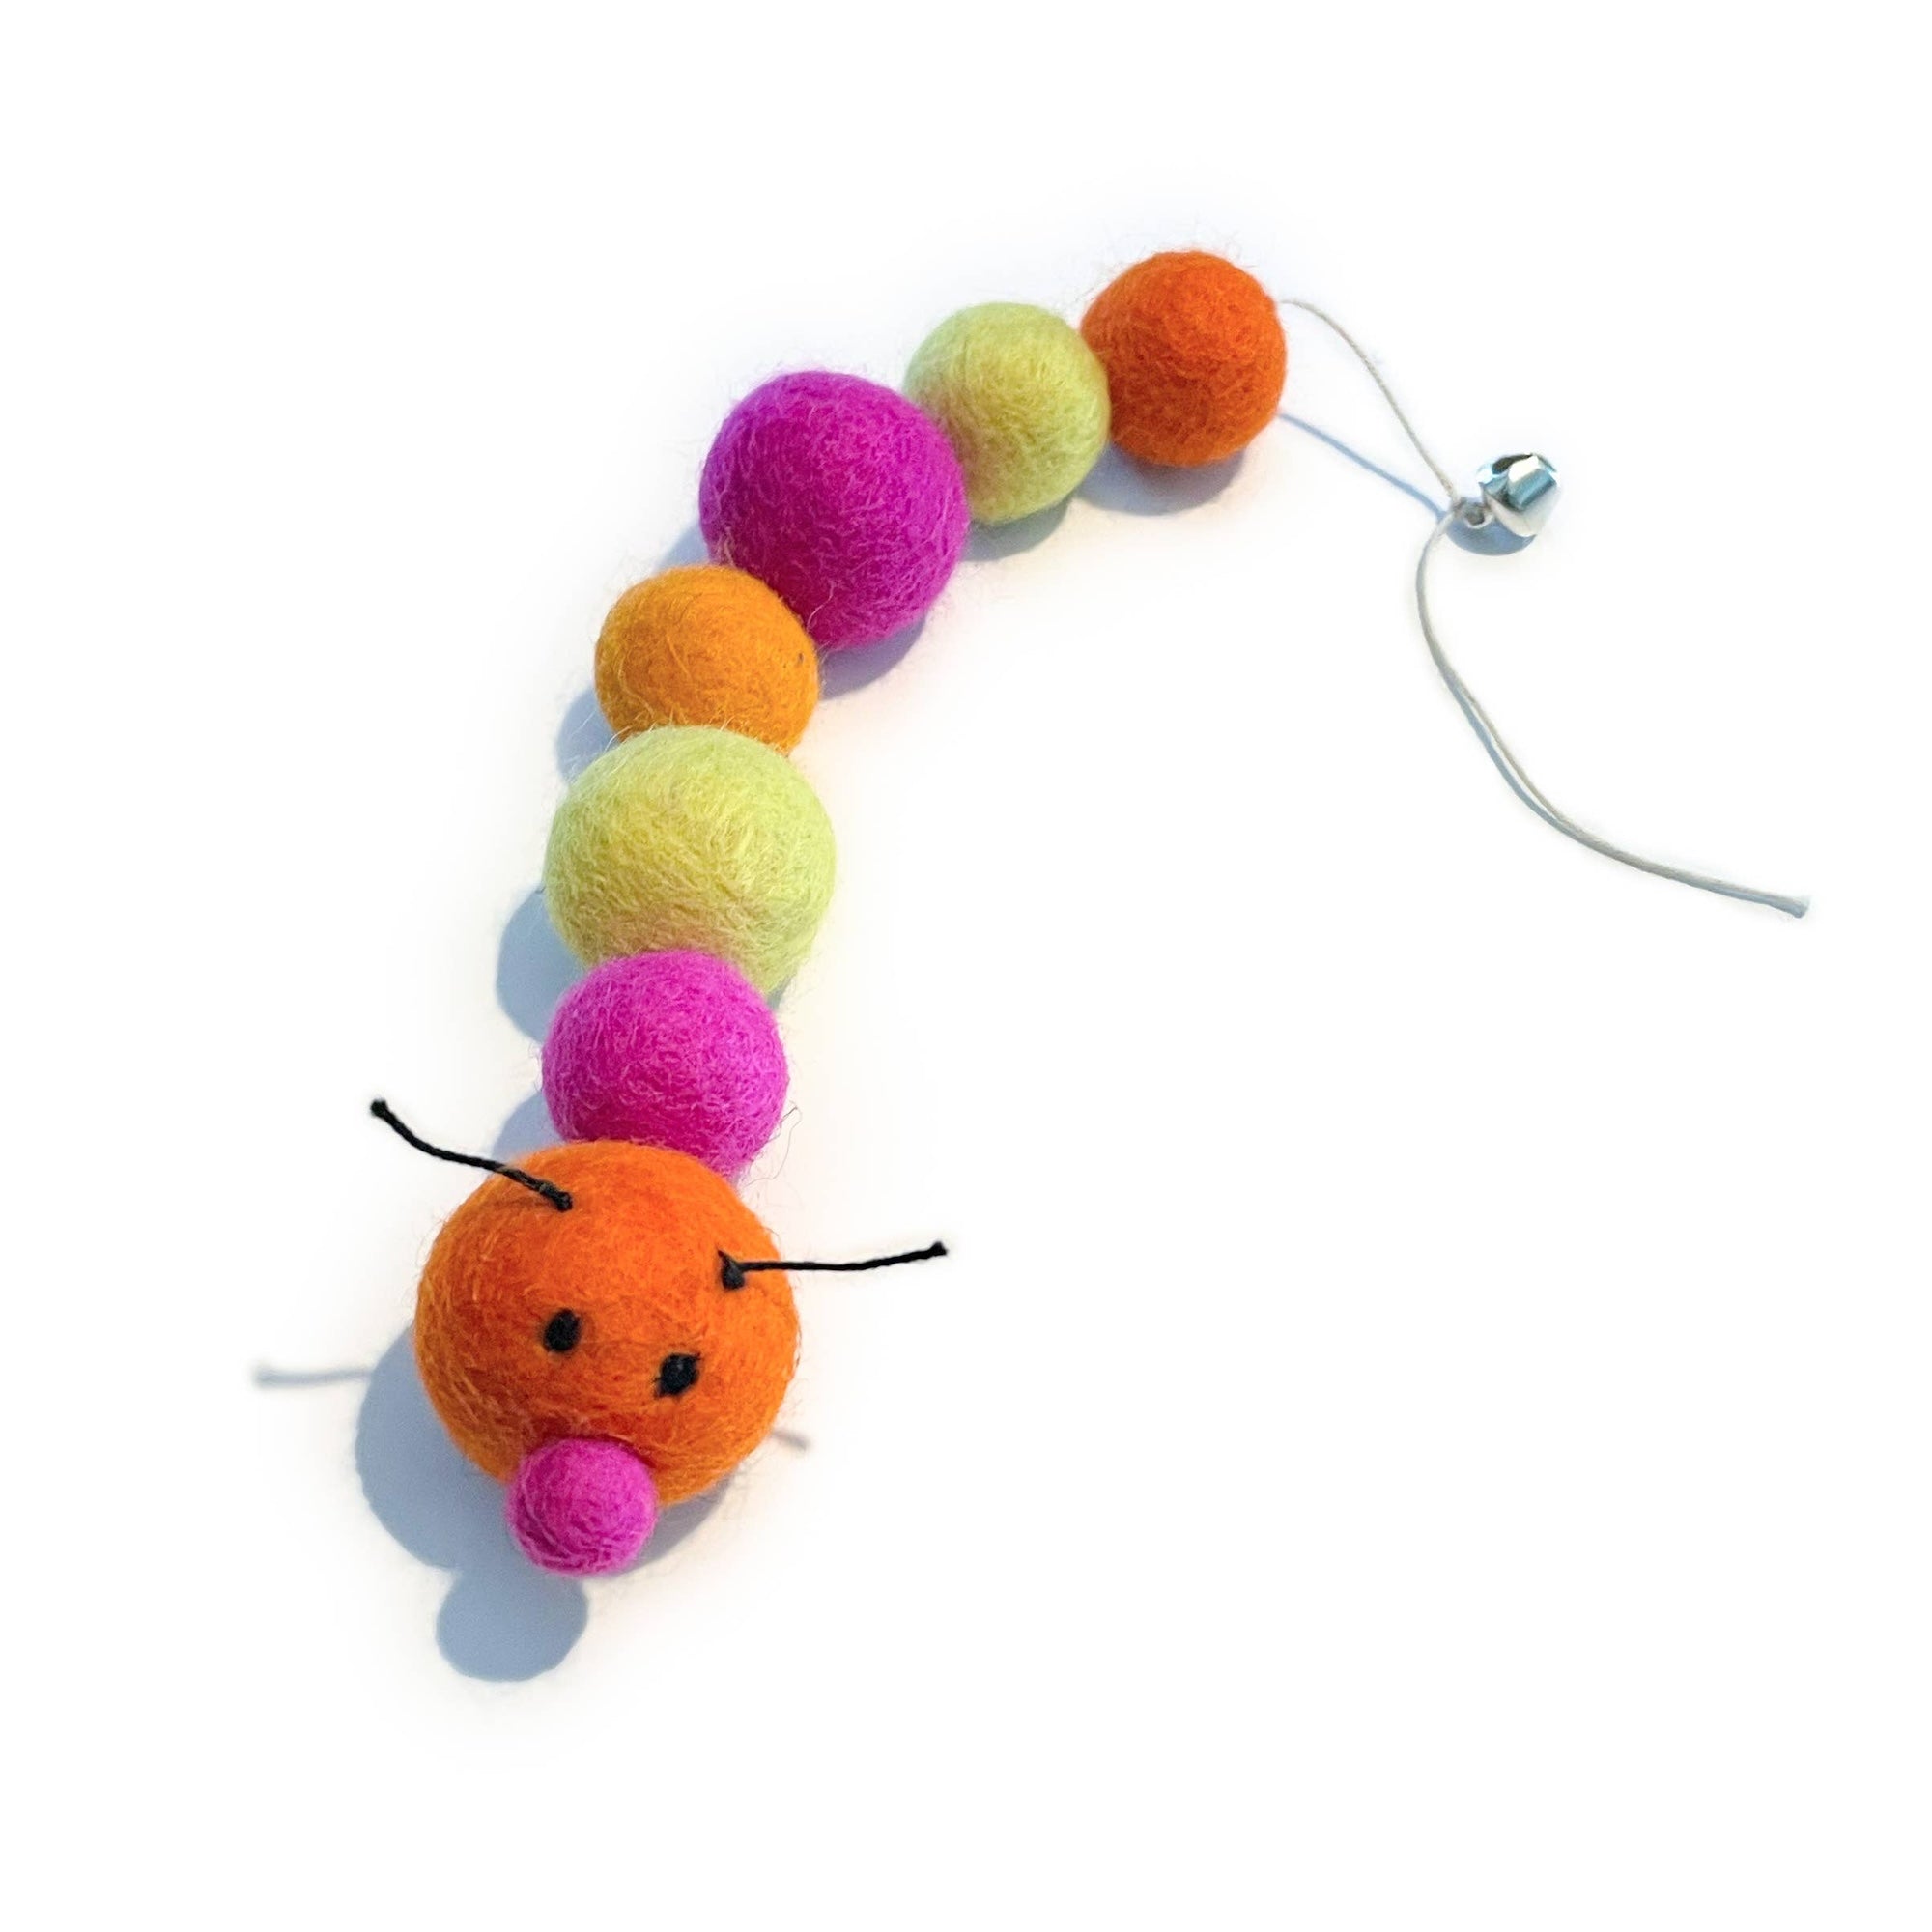 Organic wool caterpillar cat toy in vibrant tones (orange, hot pink & lemon yellow). Has bell at the end of its tail.